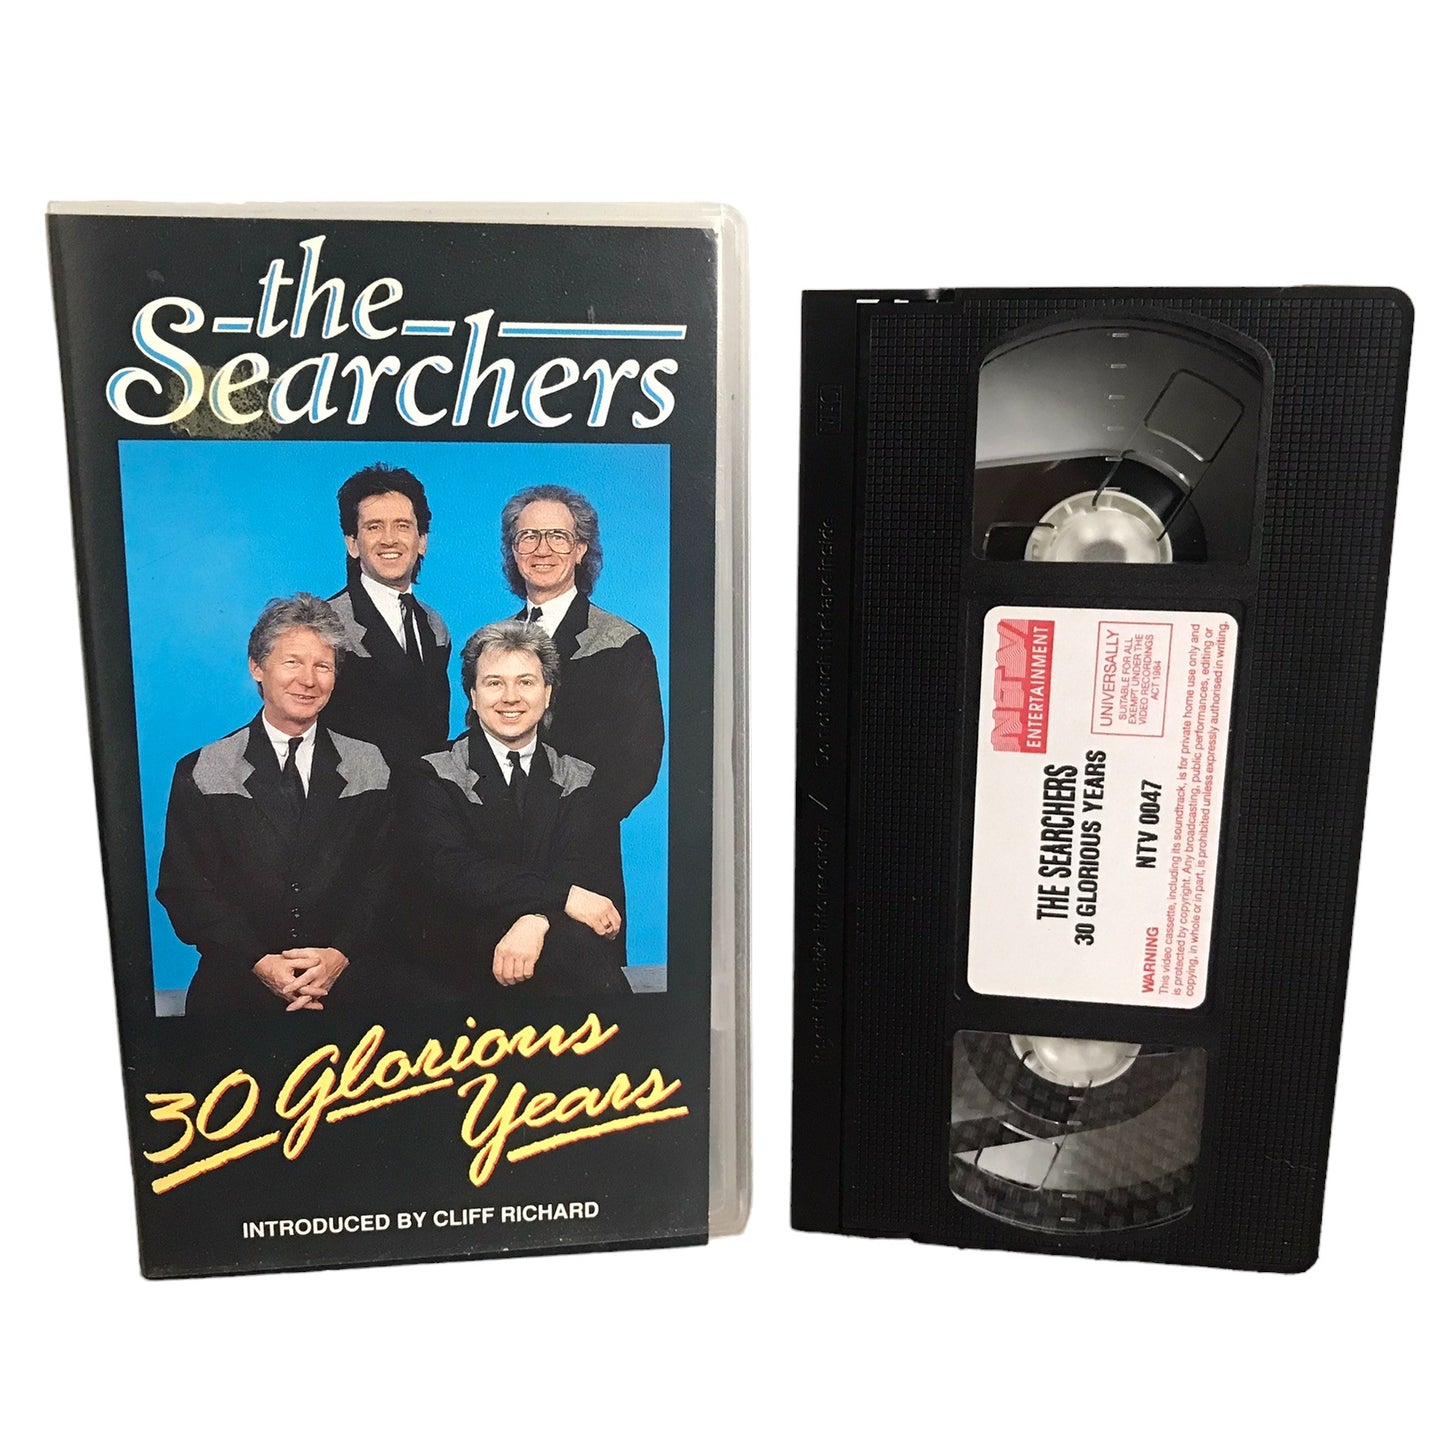 The Searchers 30 Glorious Years - NTV Entertainment - Music - Pal - VHS-